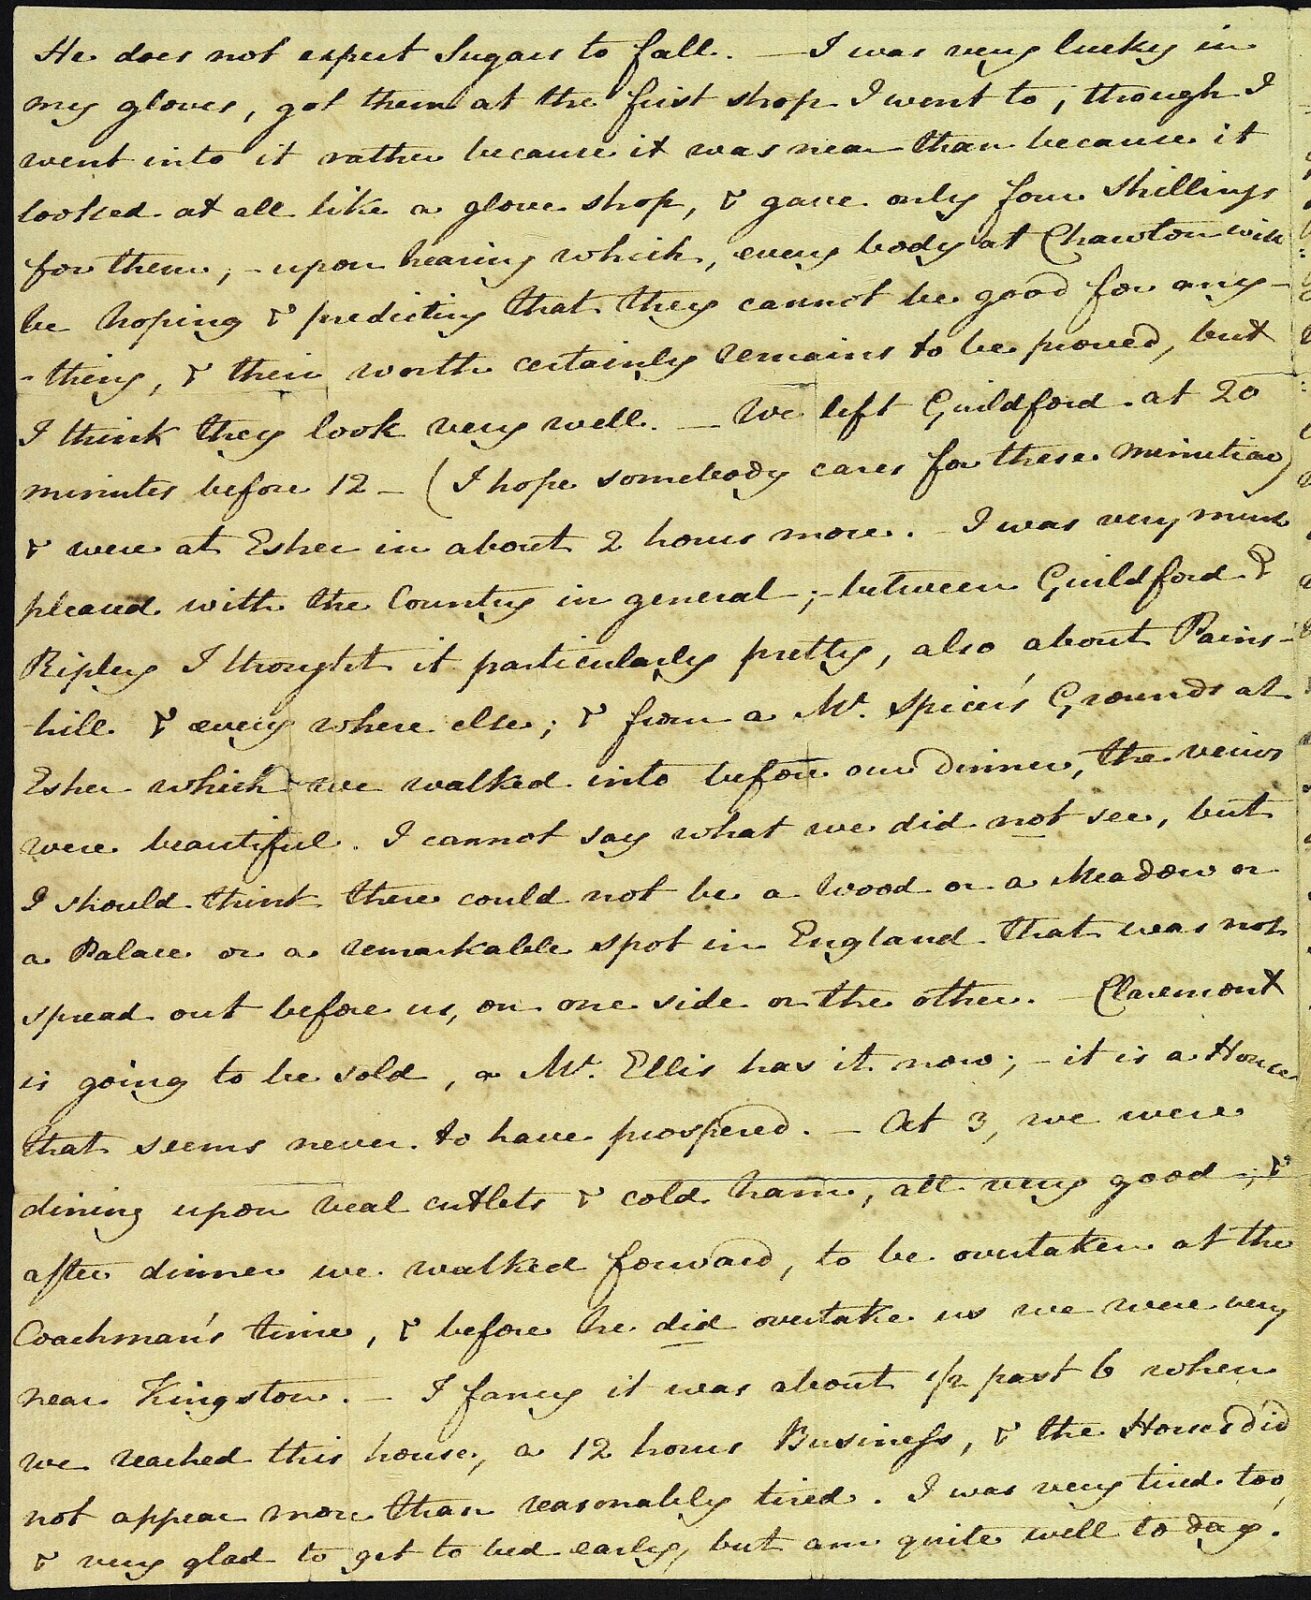 Letter from Jane Austen to Cassandra Austen, 20 May 1813, page 2